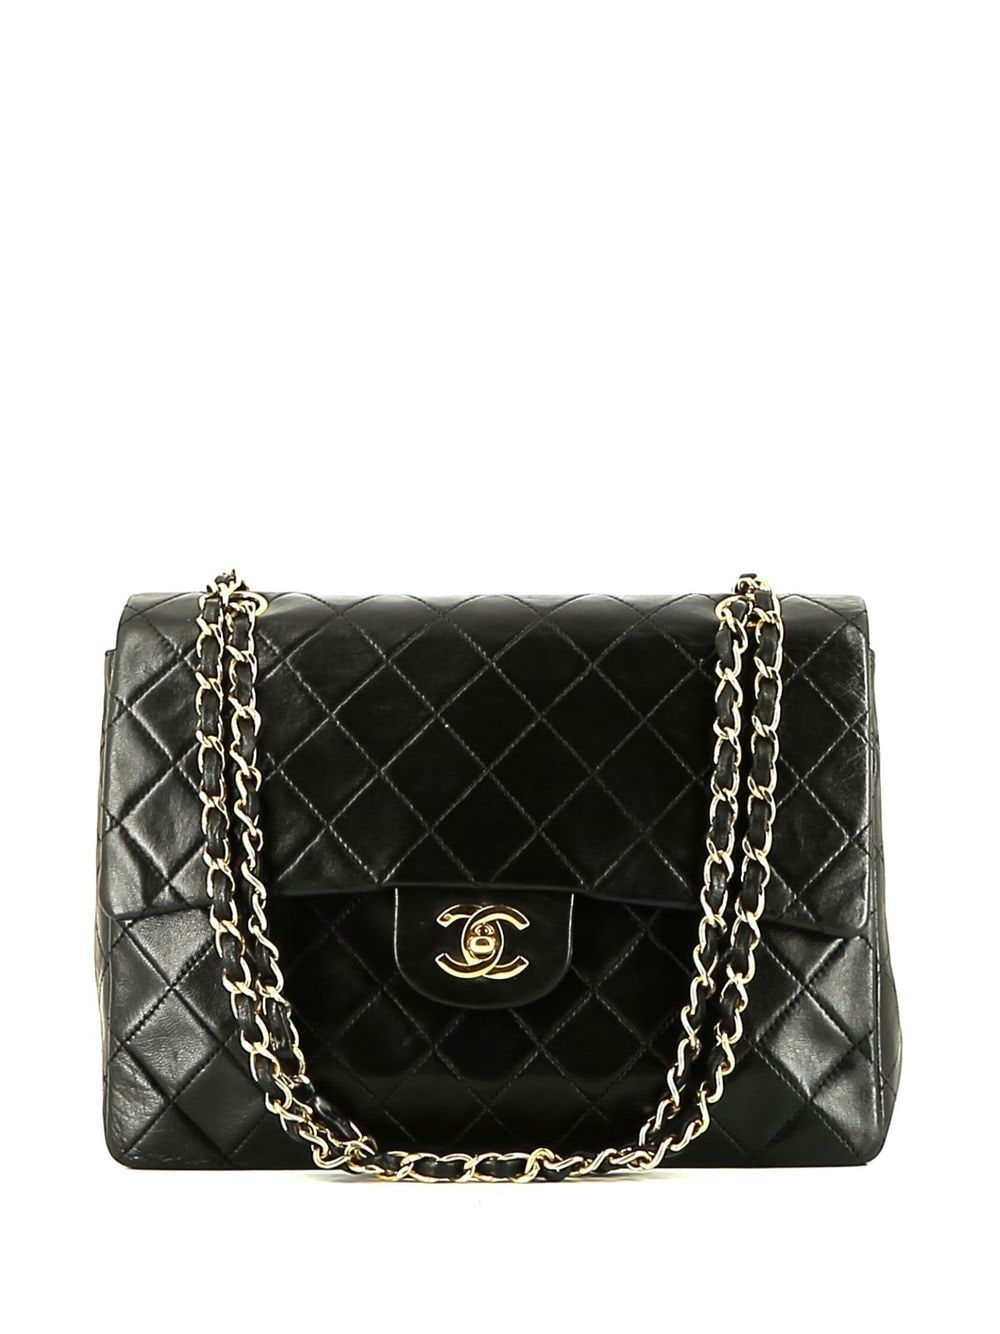 CHANEL 1991 Diamond Quilted Shoulder - Farfetch